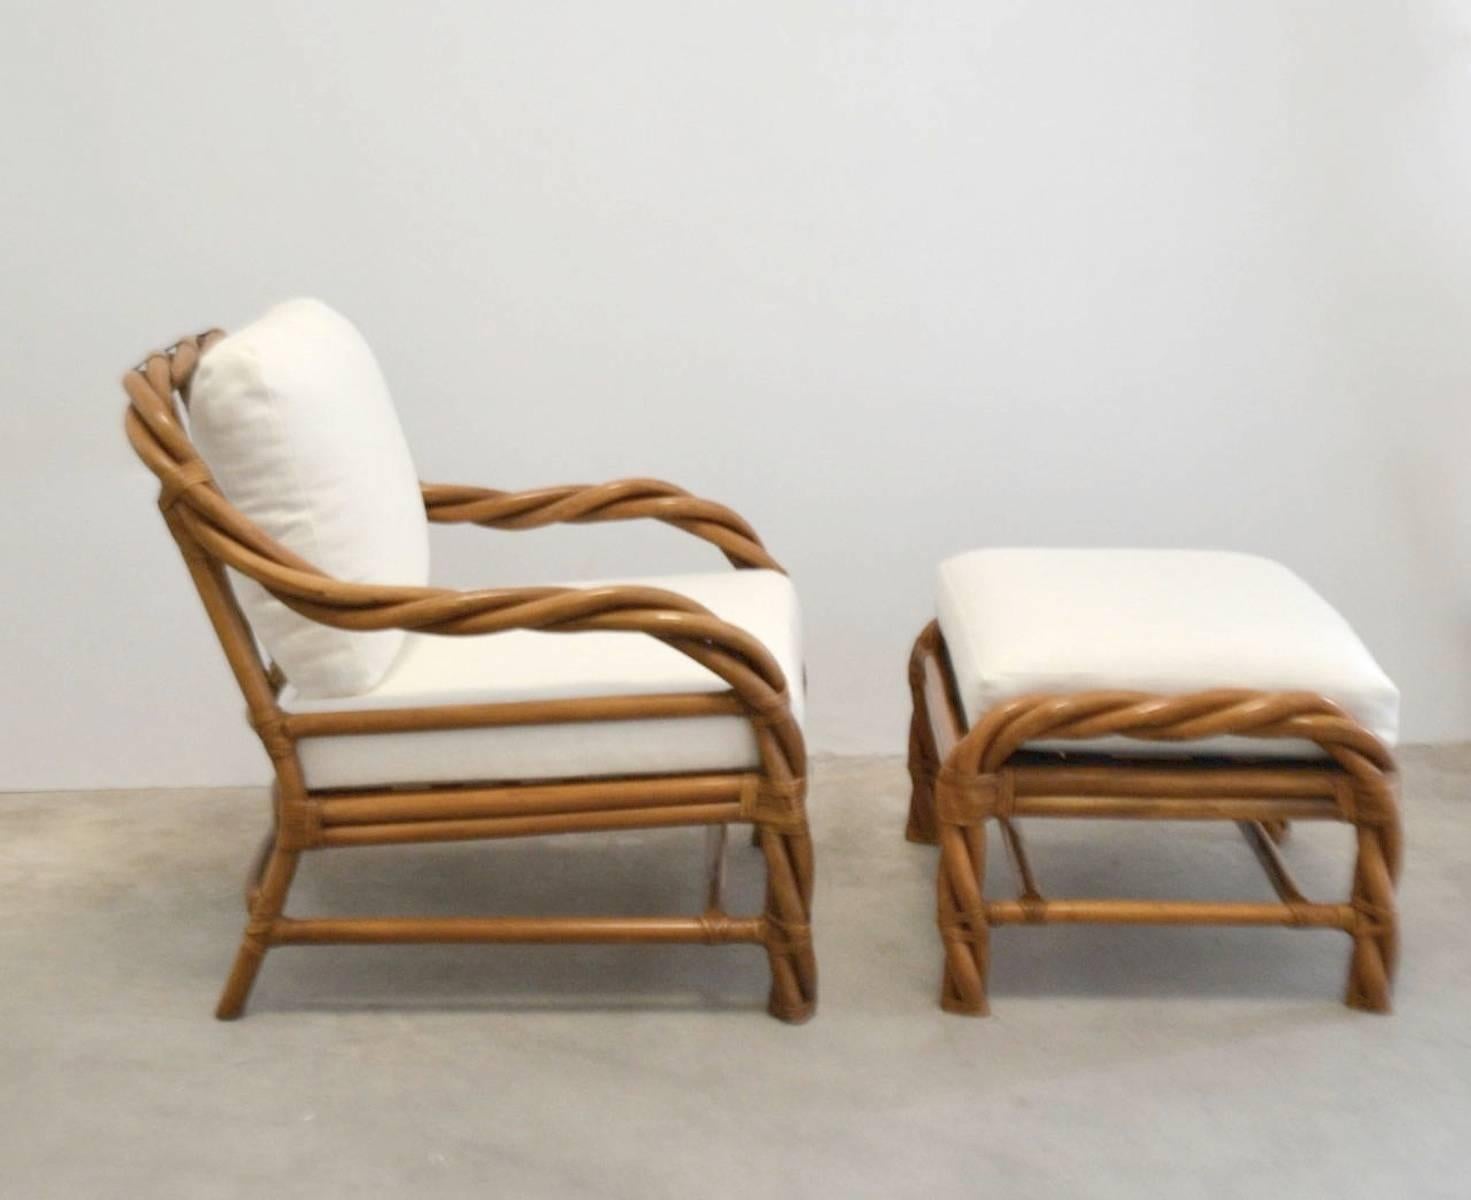 Striking Mid-Century intertwined bent rattan or cane and rawhide joint wrapped club chair and ottoman, circa 1960s. This lounge chair has been newly reupholstered in a cotton linen fabric. 
Chair is 31